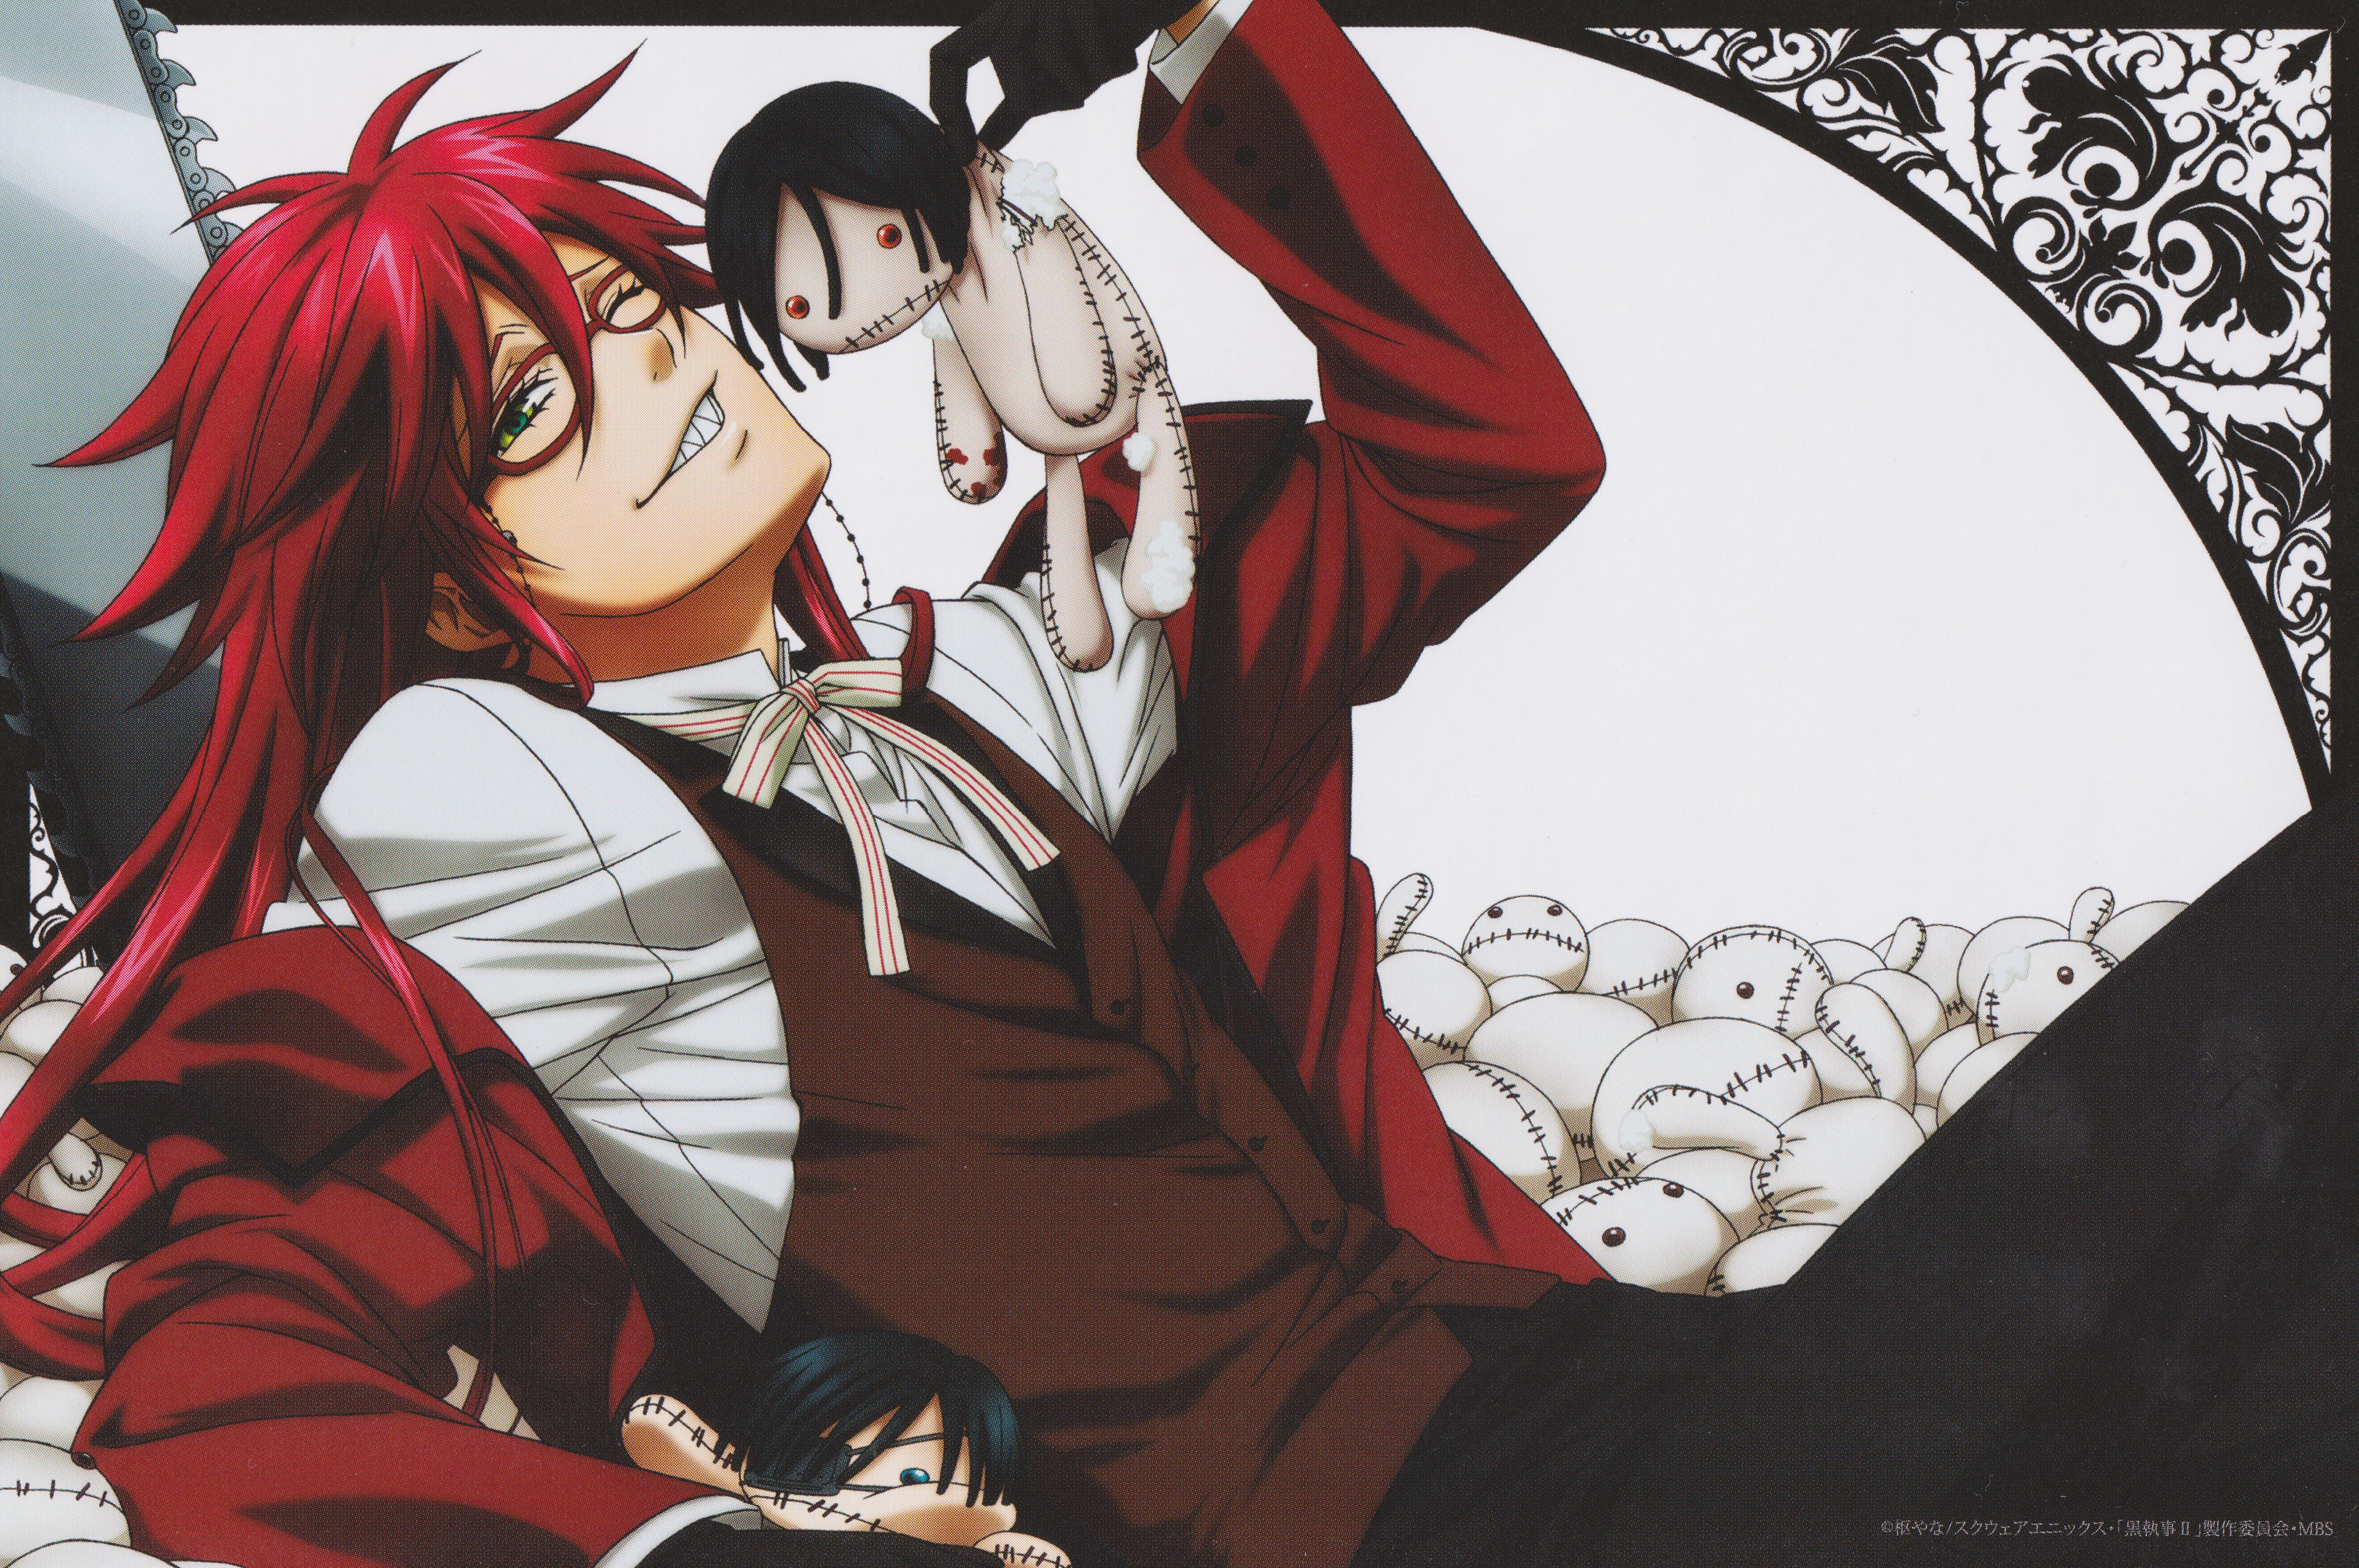 grell sutcliff, anime home screen for smartphone